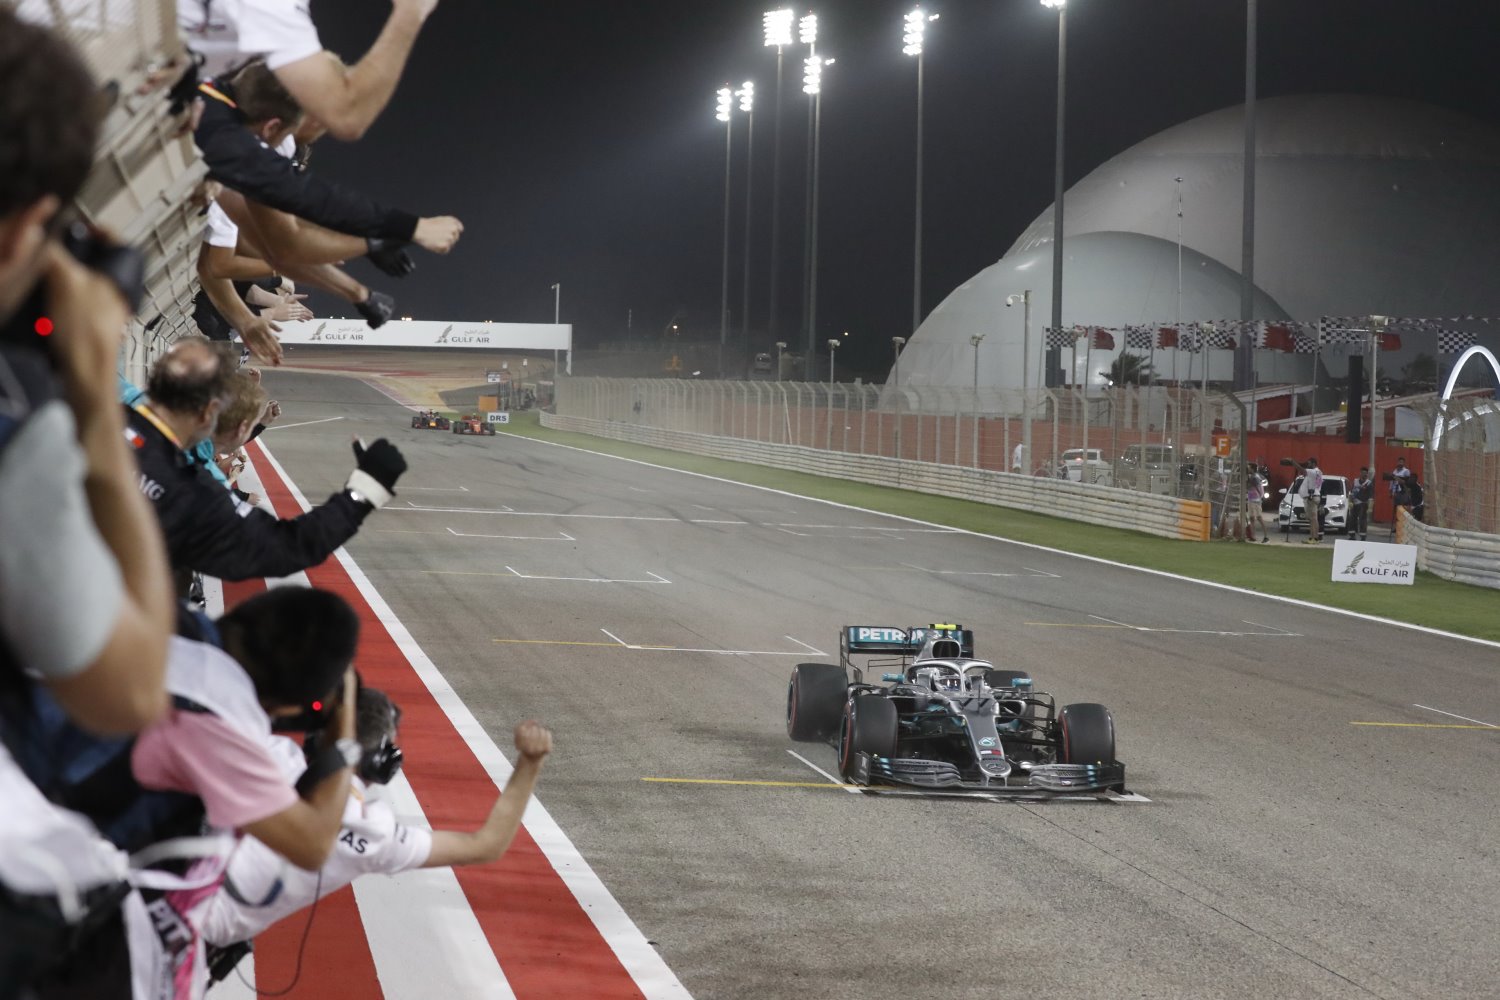 Bahrain GP - Hamilton wins in 2019 in superior Mercedes, will win again in 2020 if race is held